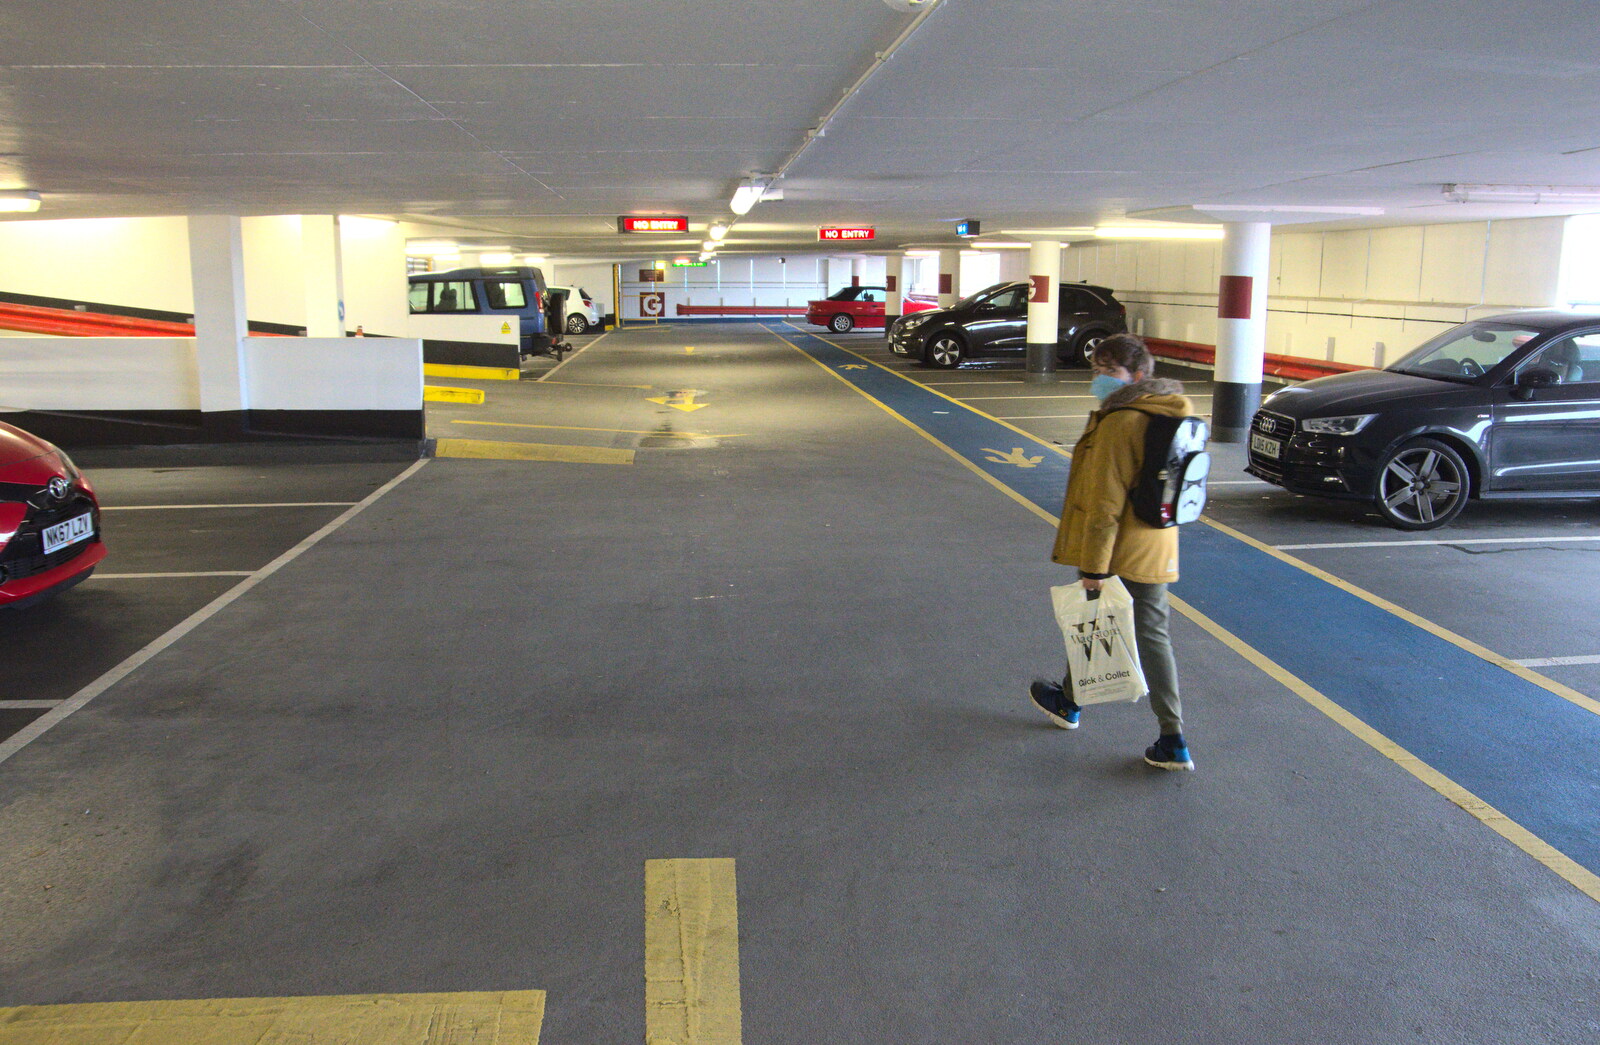 In St. Giles Car Park from A Trip to Norwich, Norfolk - 27th September 2020